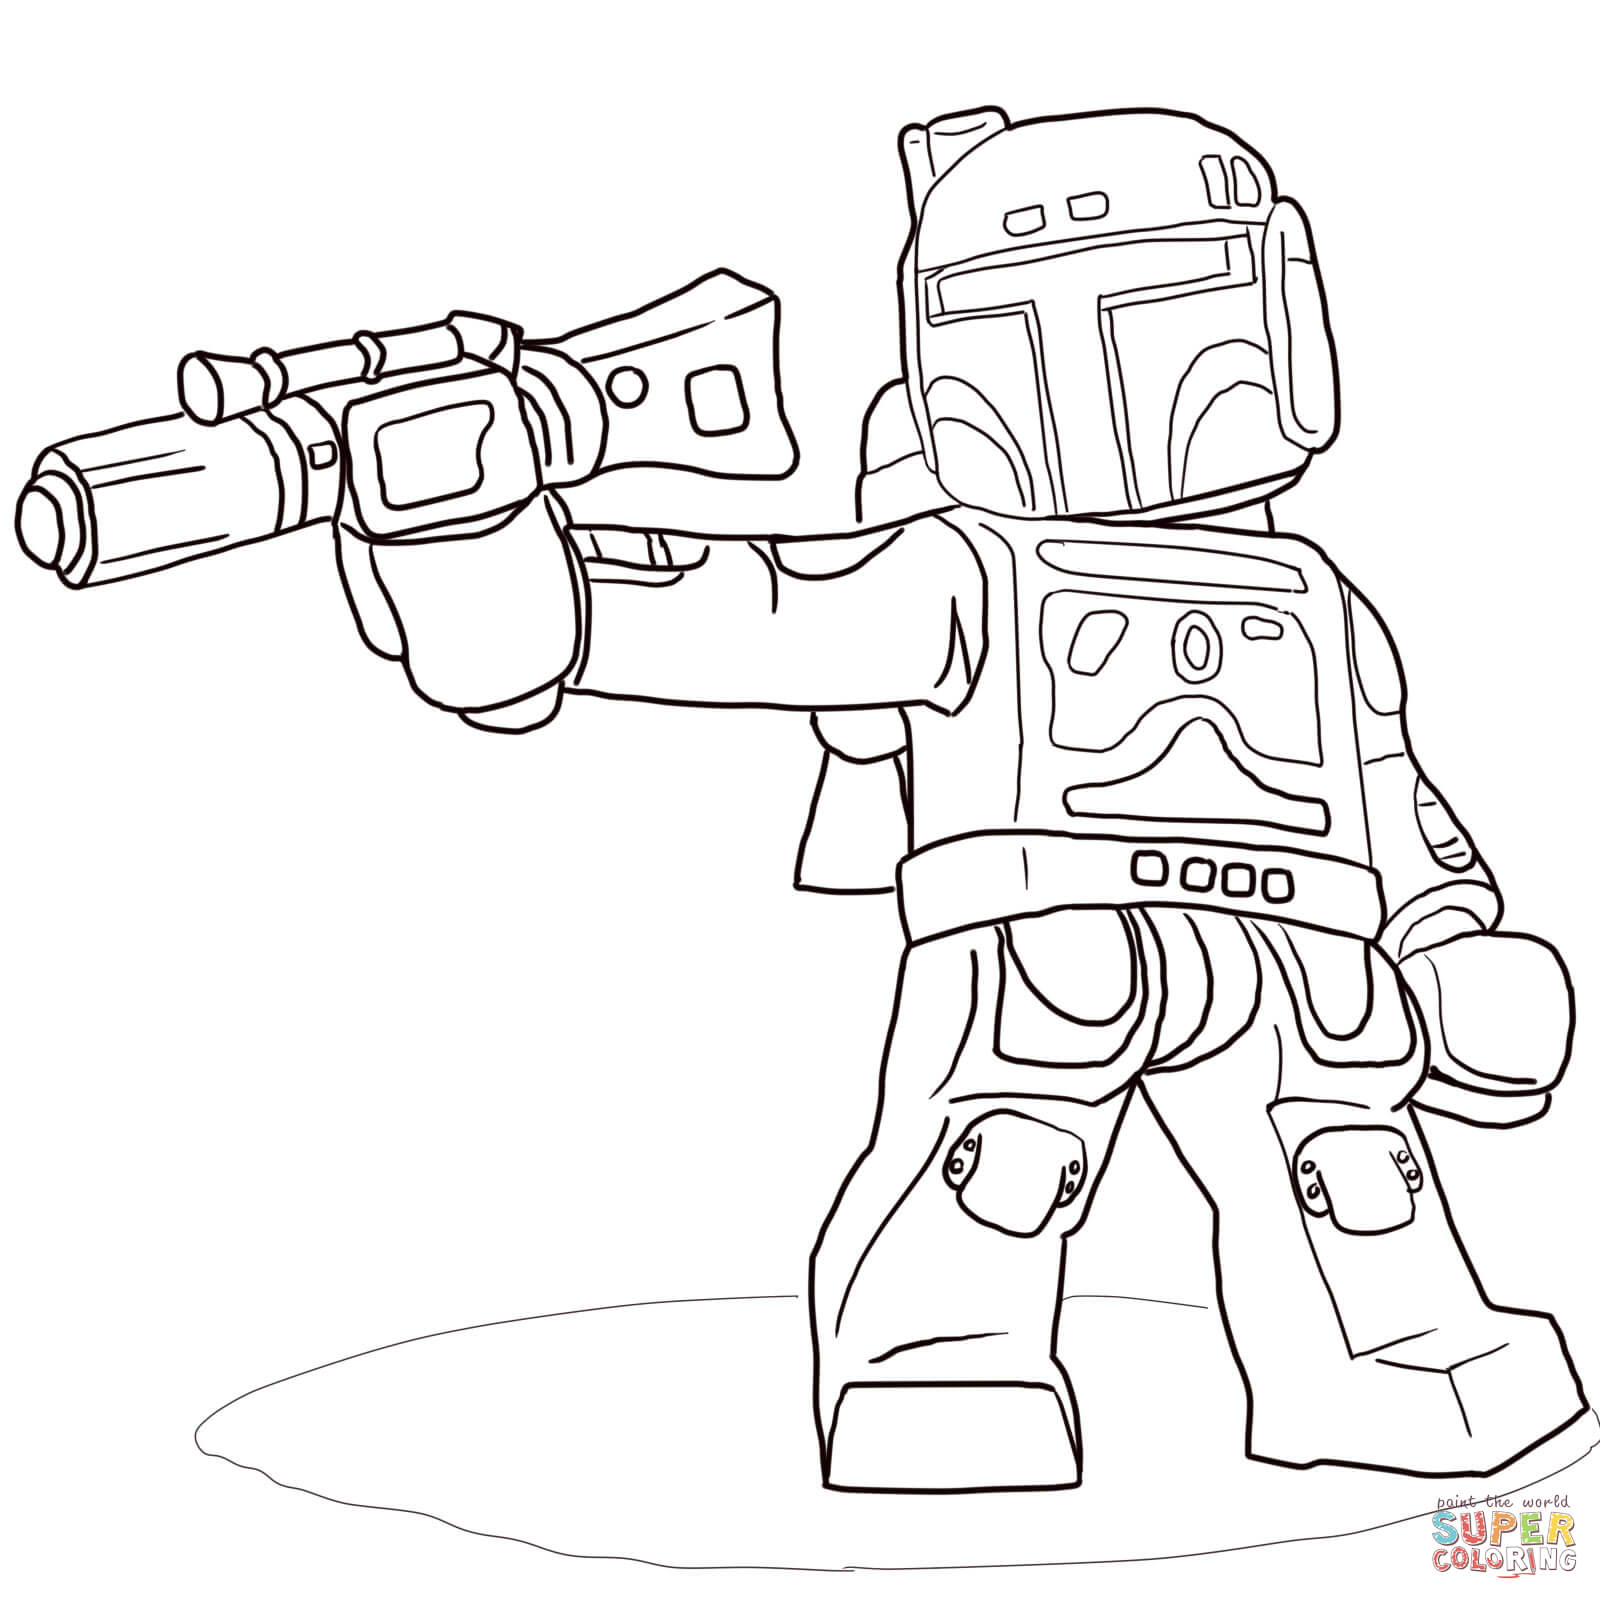 Lego Star Wars Boba Fett Coloring Page